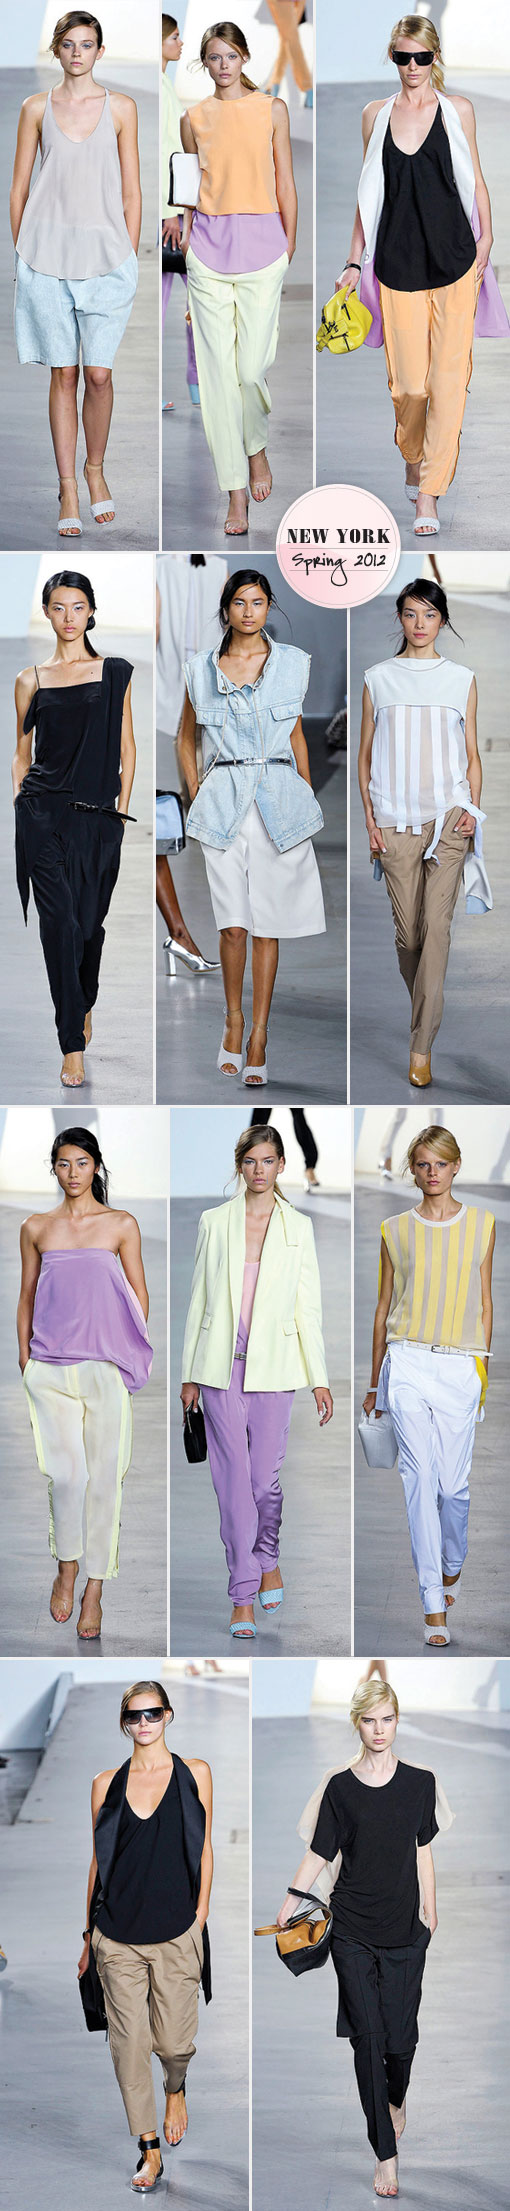 Phillip Lim Brings Out The Brights For Spring 2012